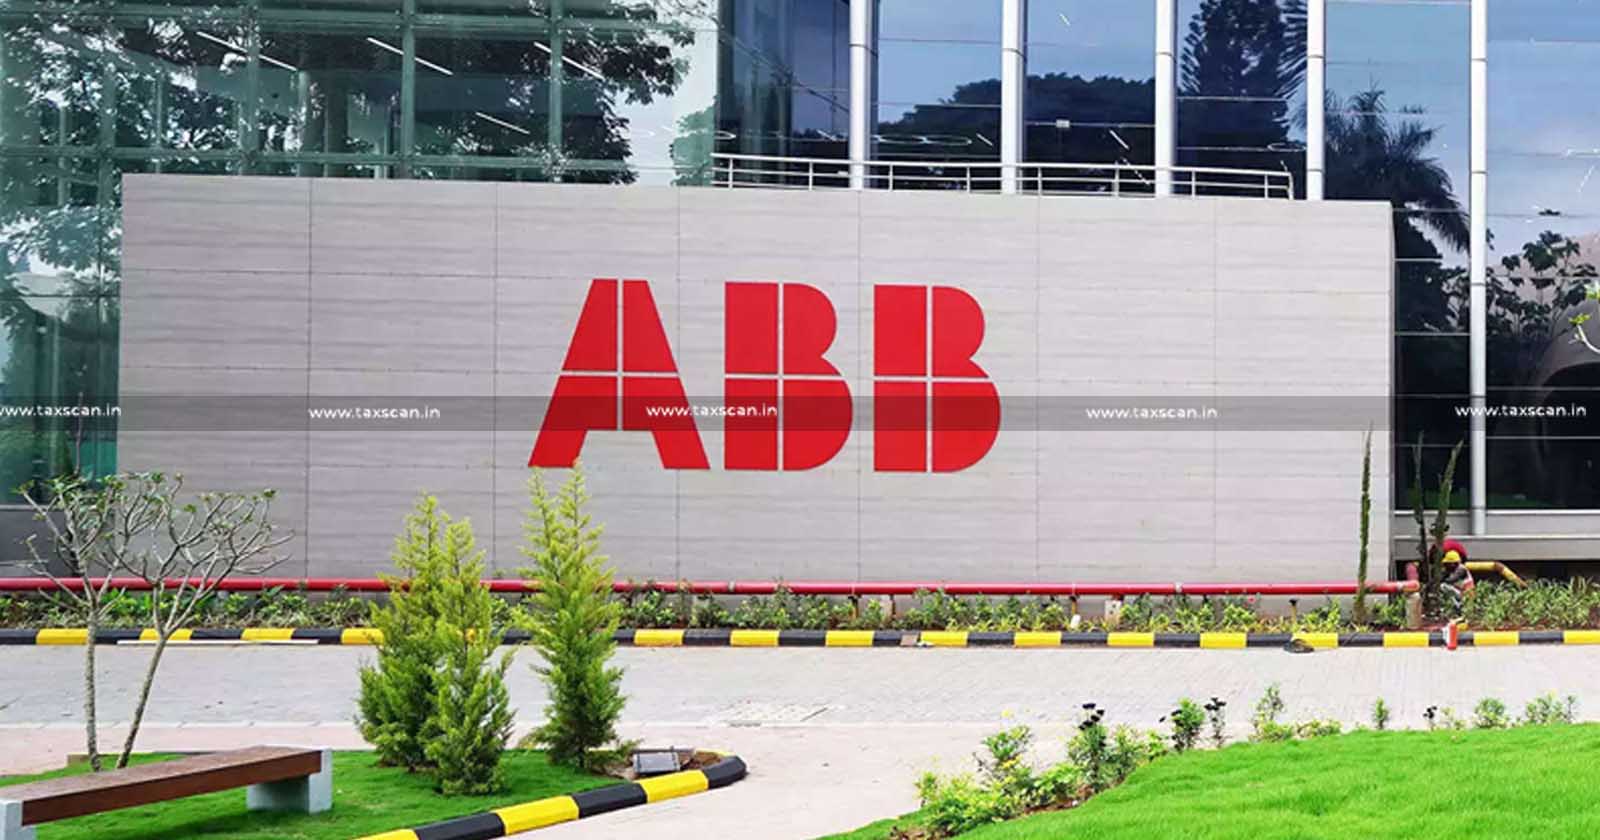 ABB Hiring - Accounting & Reporting Analyst - Accounting & Reporting Analyst with Bachelor’s or Master's Qualifications - Expertise - ABB job openings - jobscan